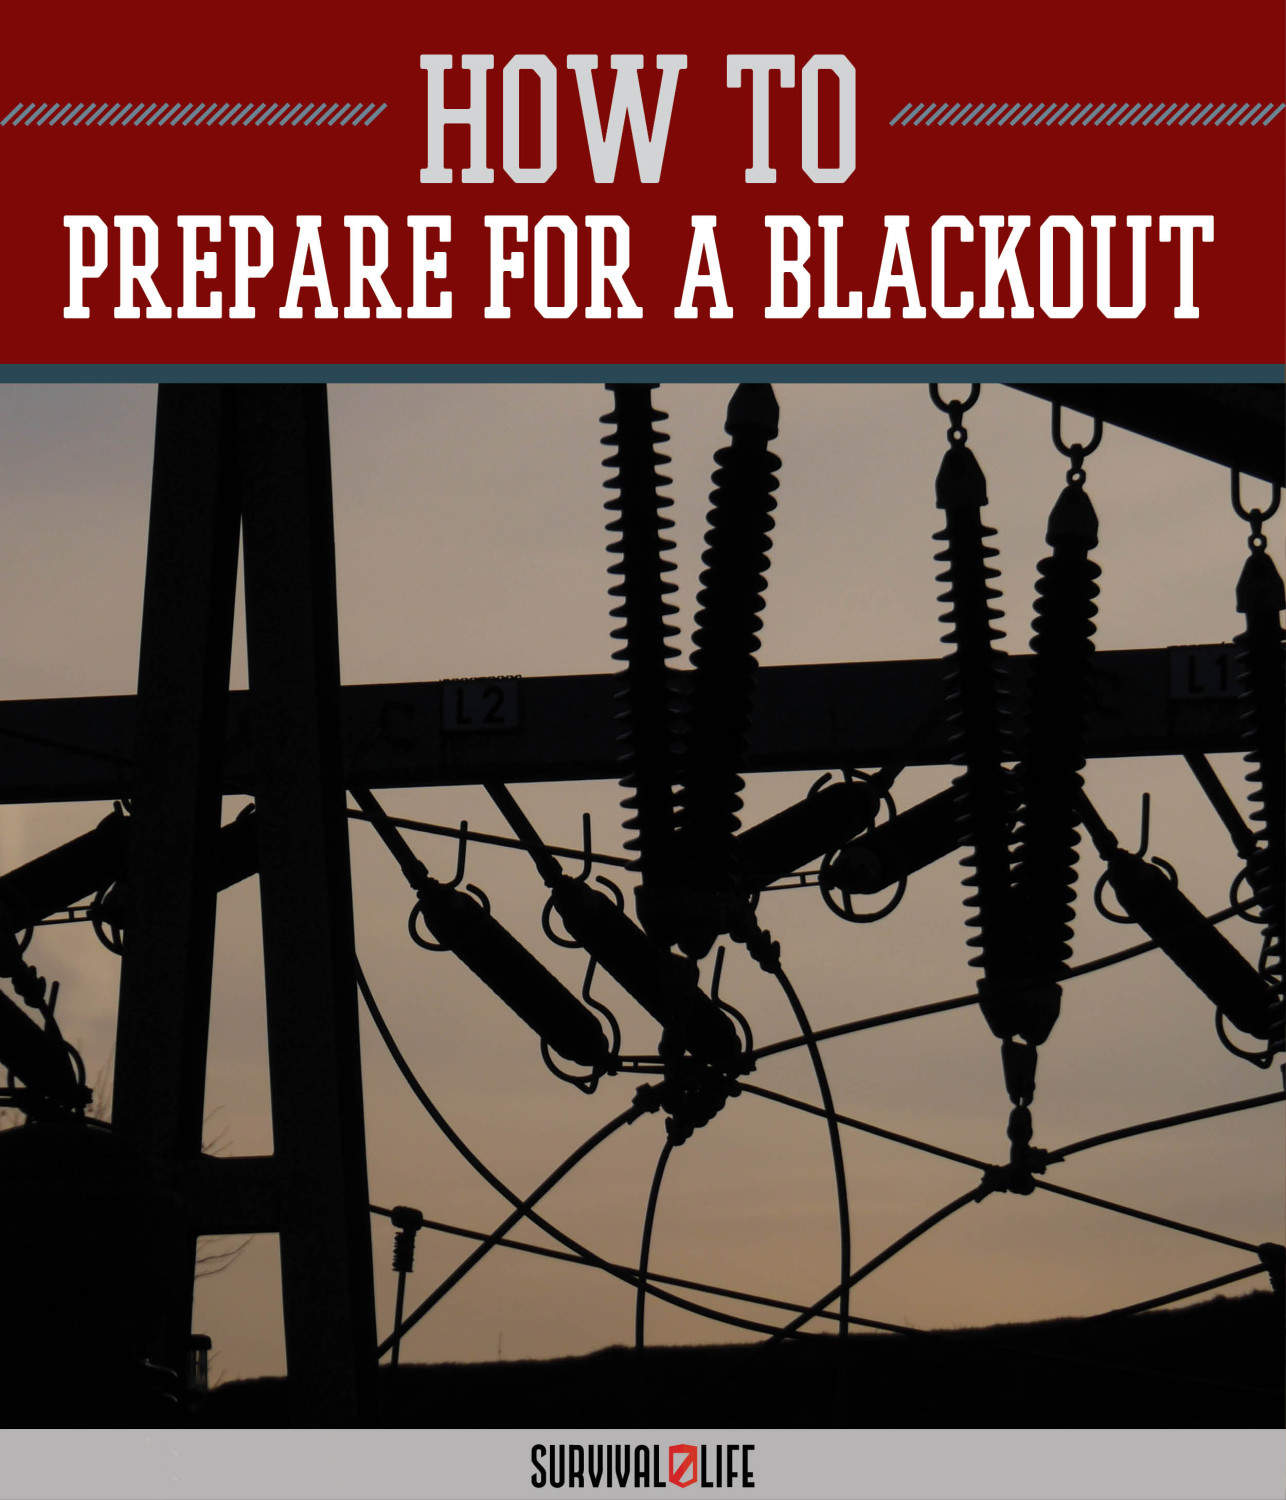 Blackout: How Did This City's Lights Stay On? by Survival Life at http://survivallife.staging.wpengine.com/2015/05/06/blackout-lights-stayed-on/